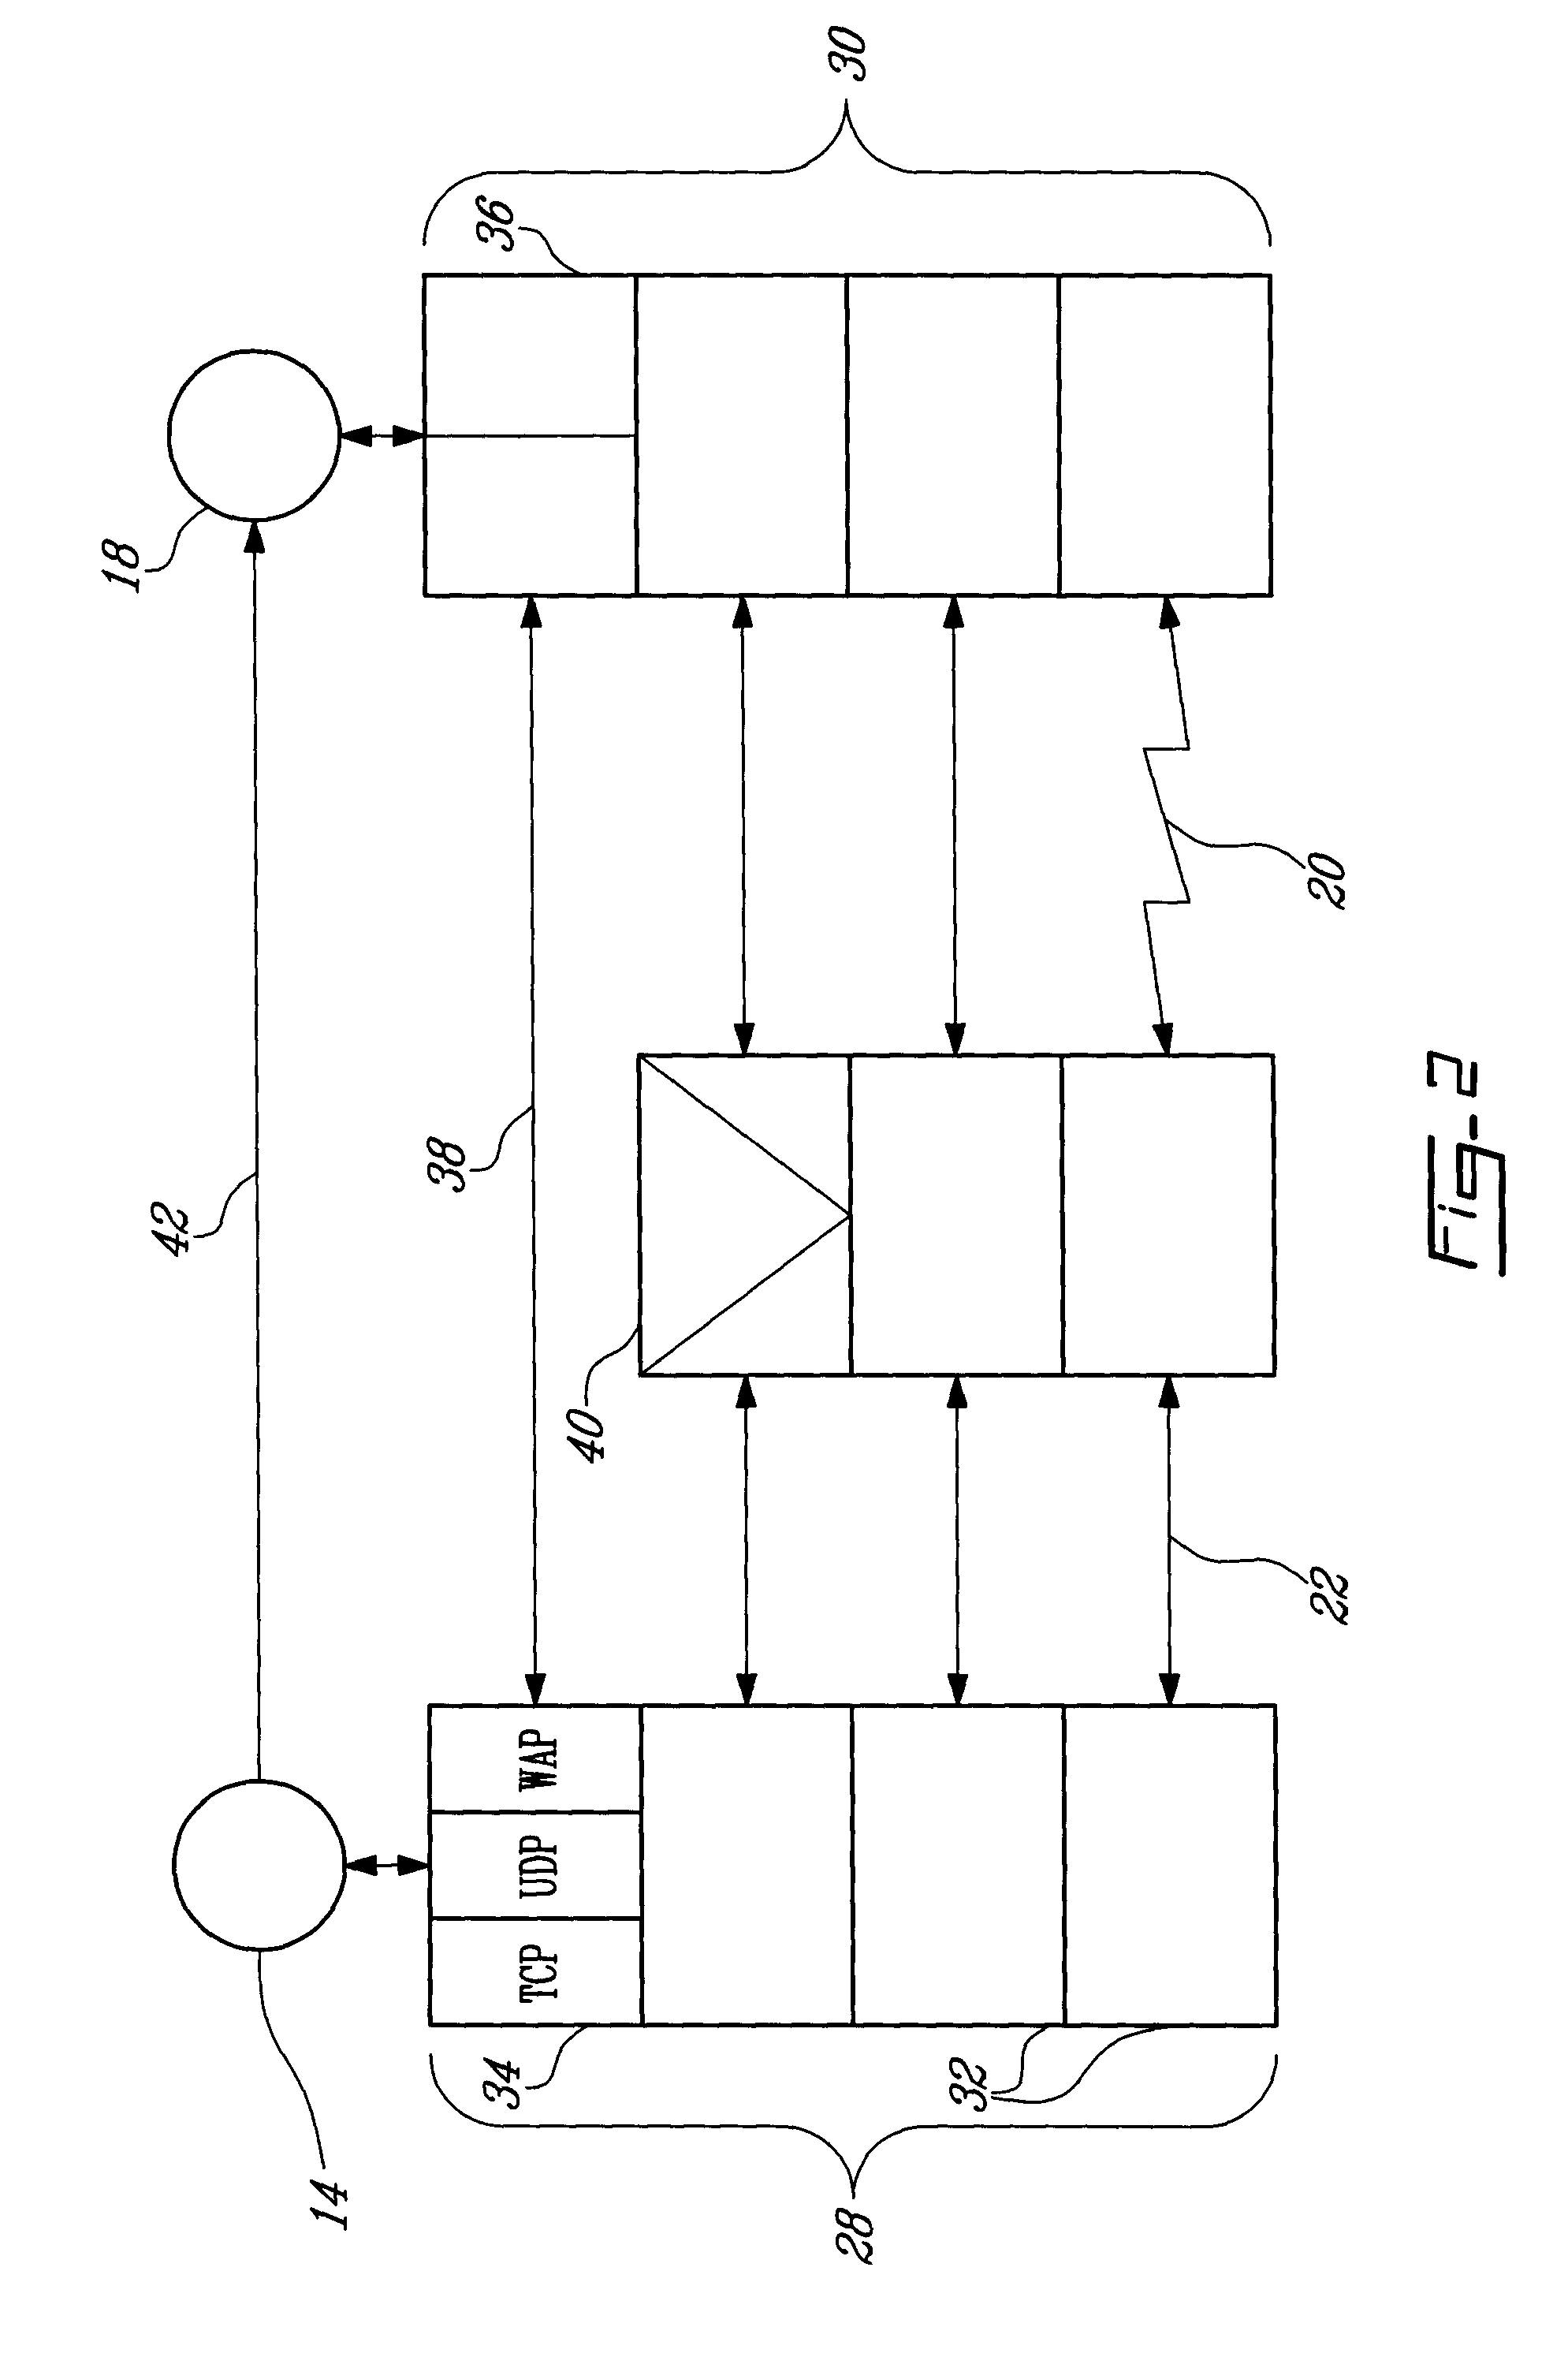 Method and System for Communicating Message Notifications to Mobile Devices